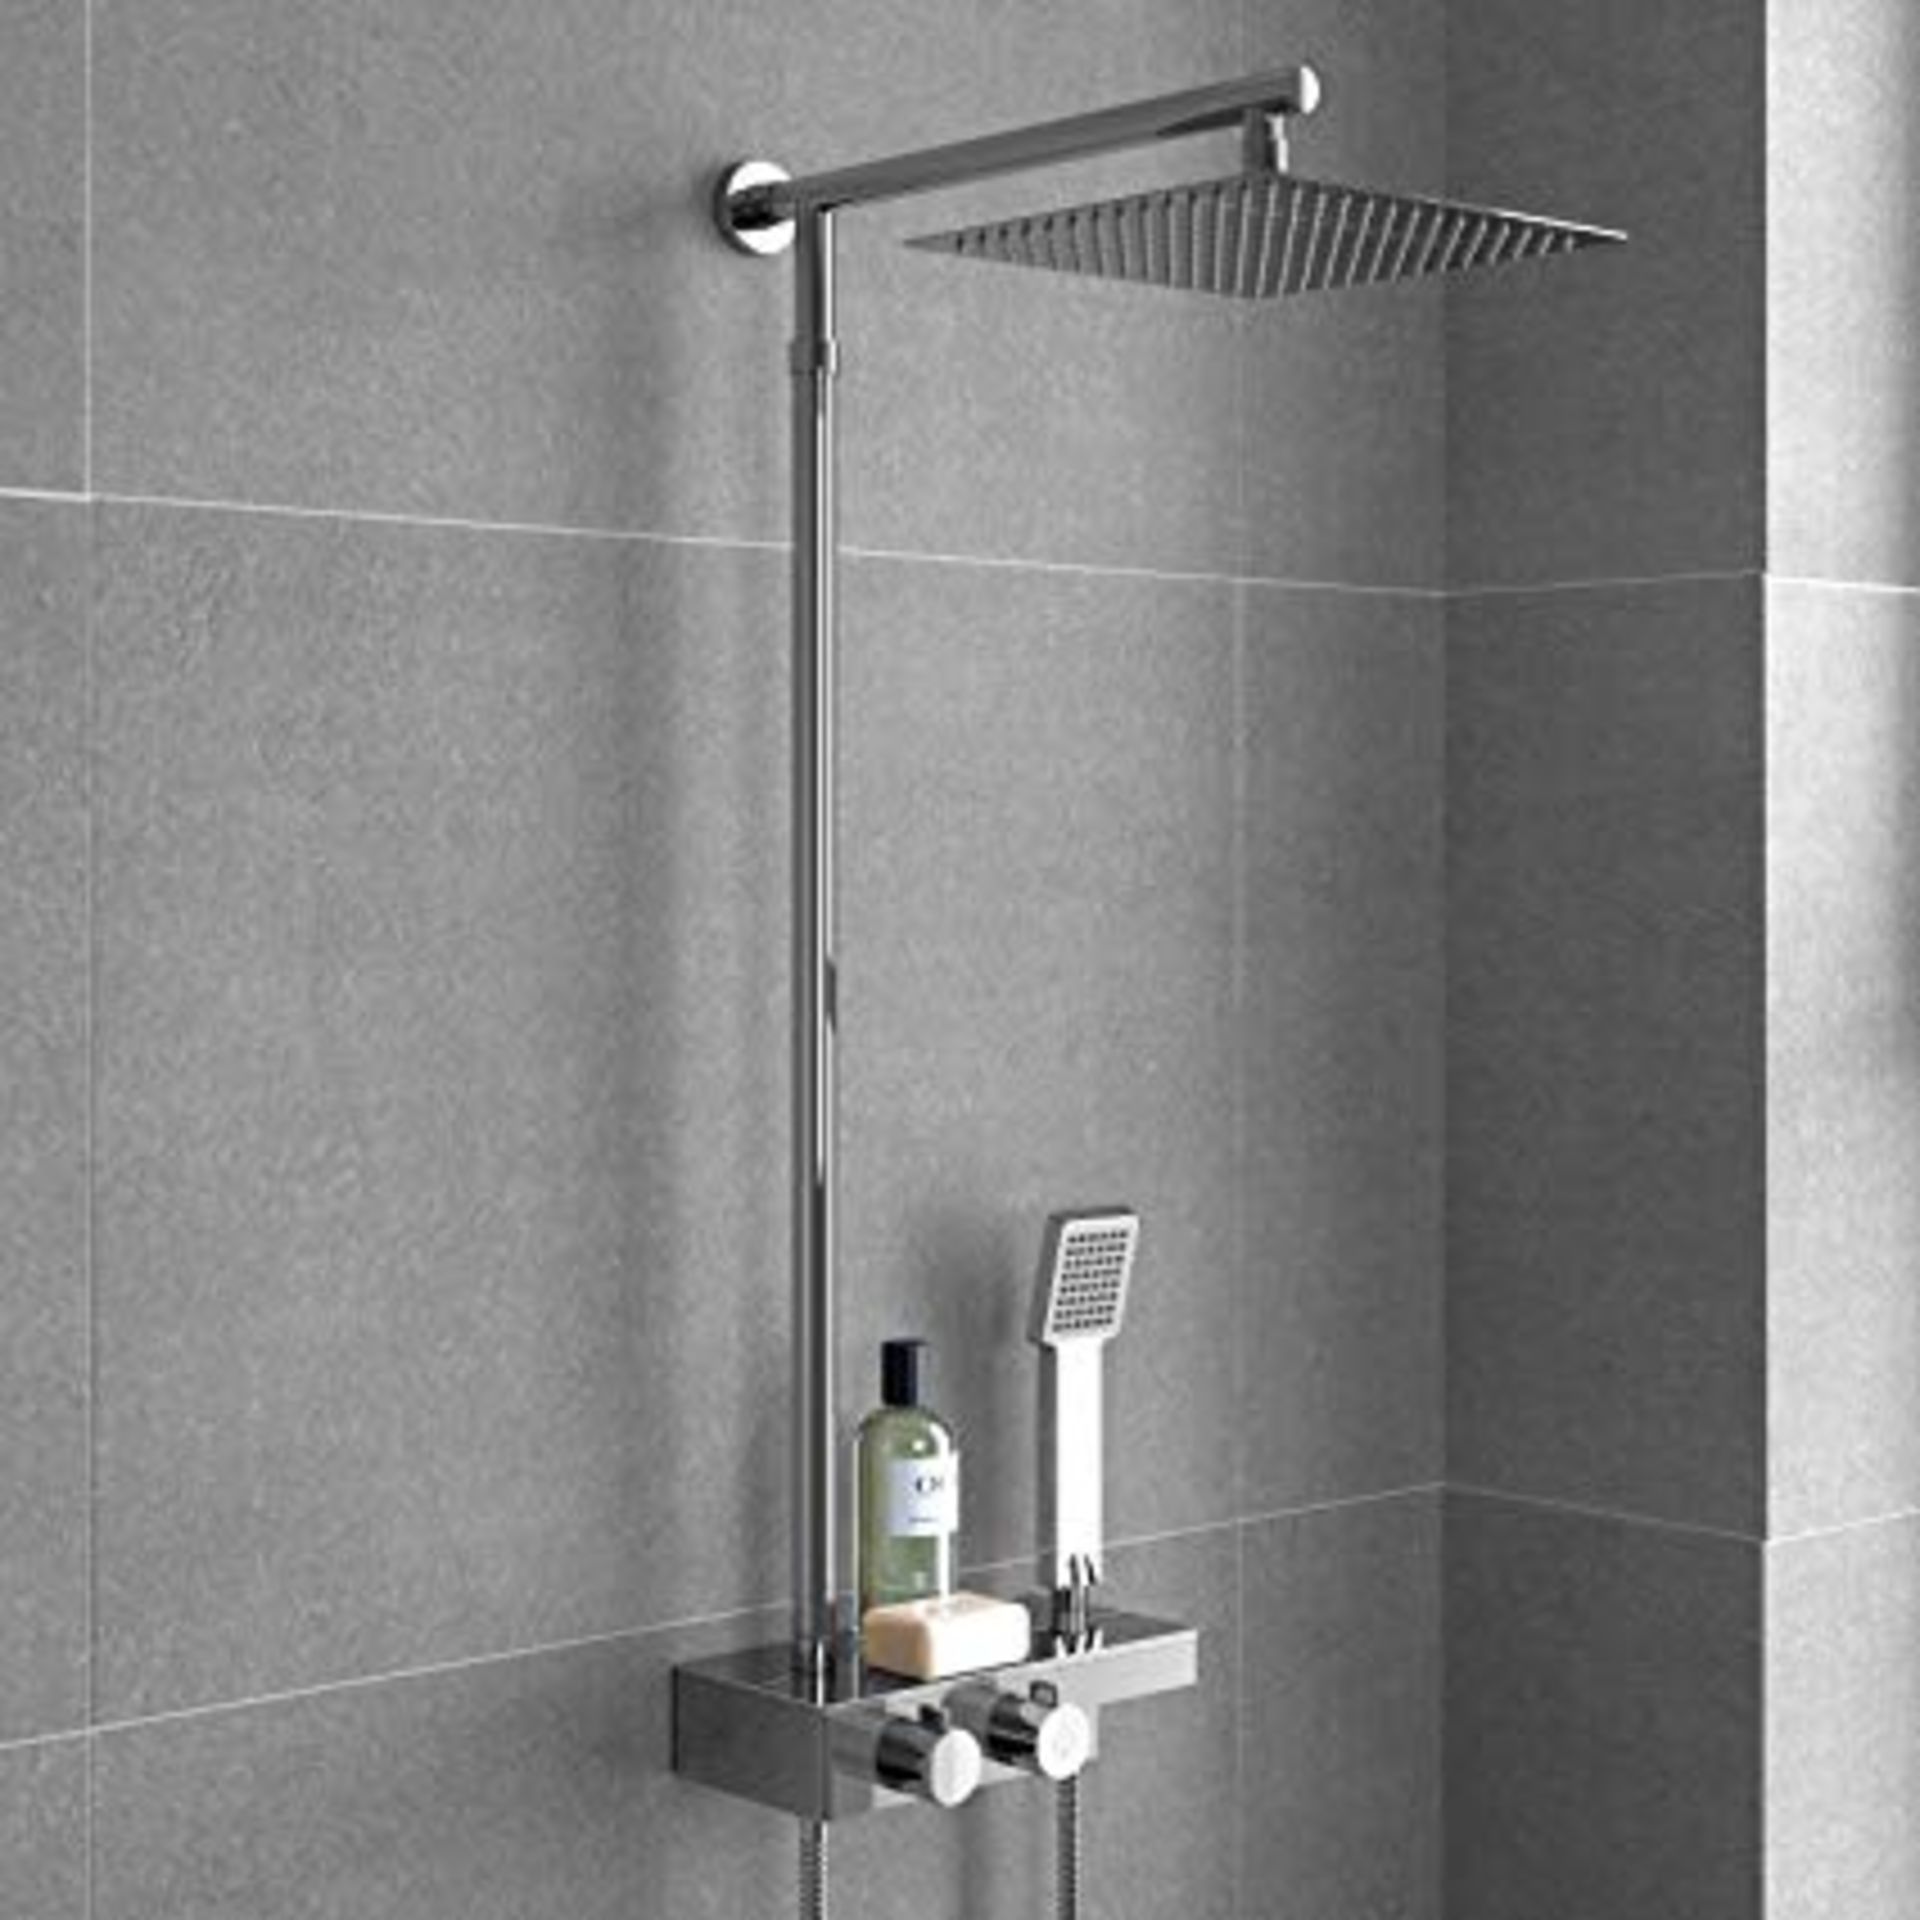 (CP140) Square Exposed Thermostatic Mixer Shower Kit With Handheld & Storage Shelf. Includes a... - Image 2 of 2